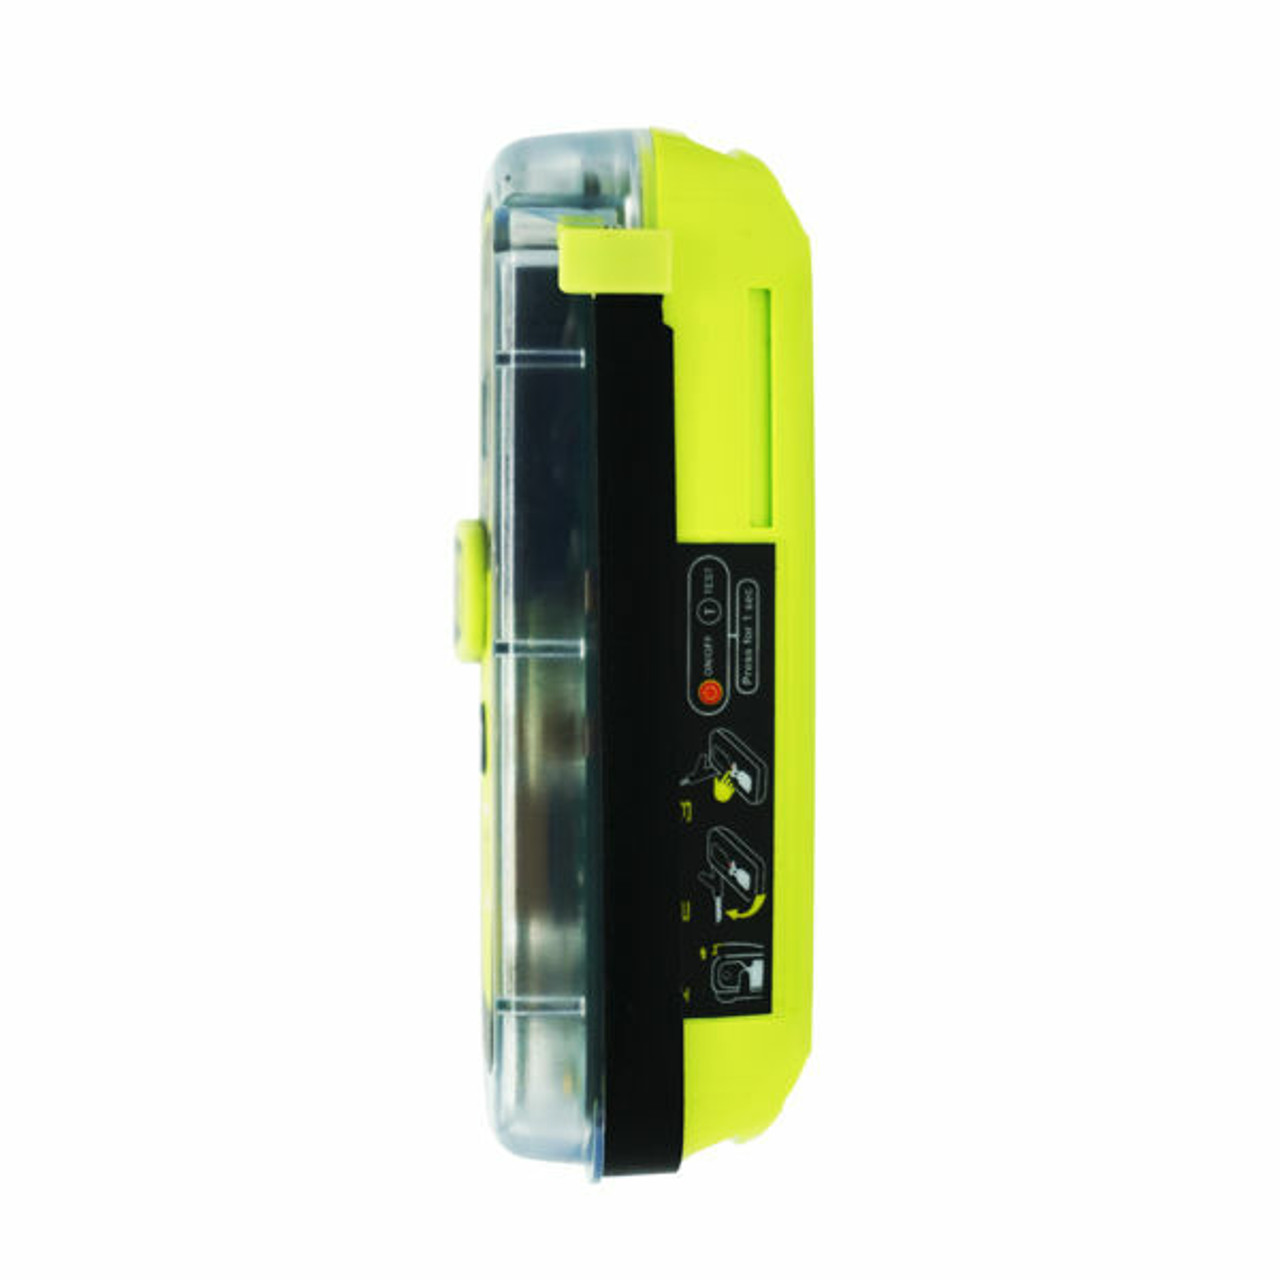 ACR ResQLink 400 NZ Personal Locator Beacon (PLB) and Pouch